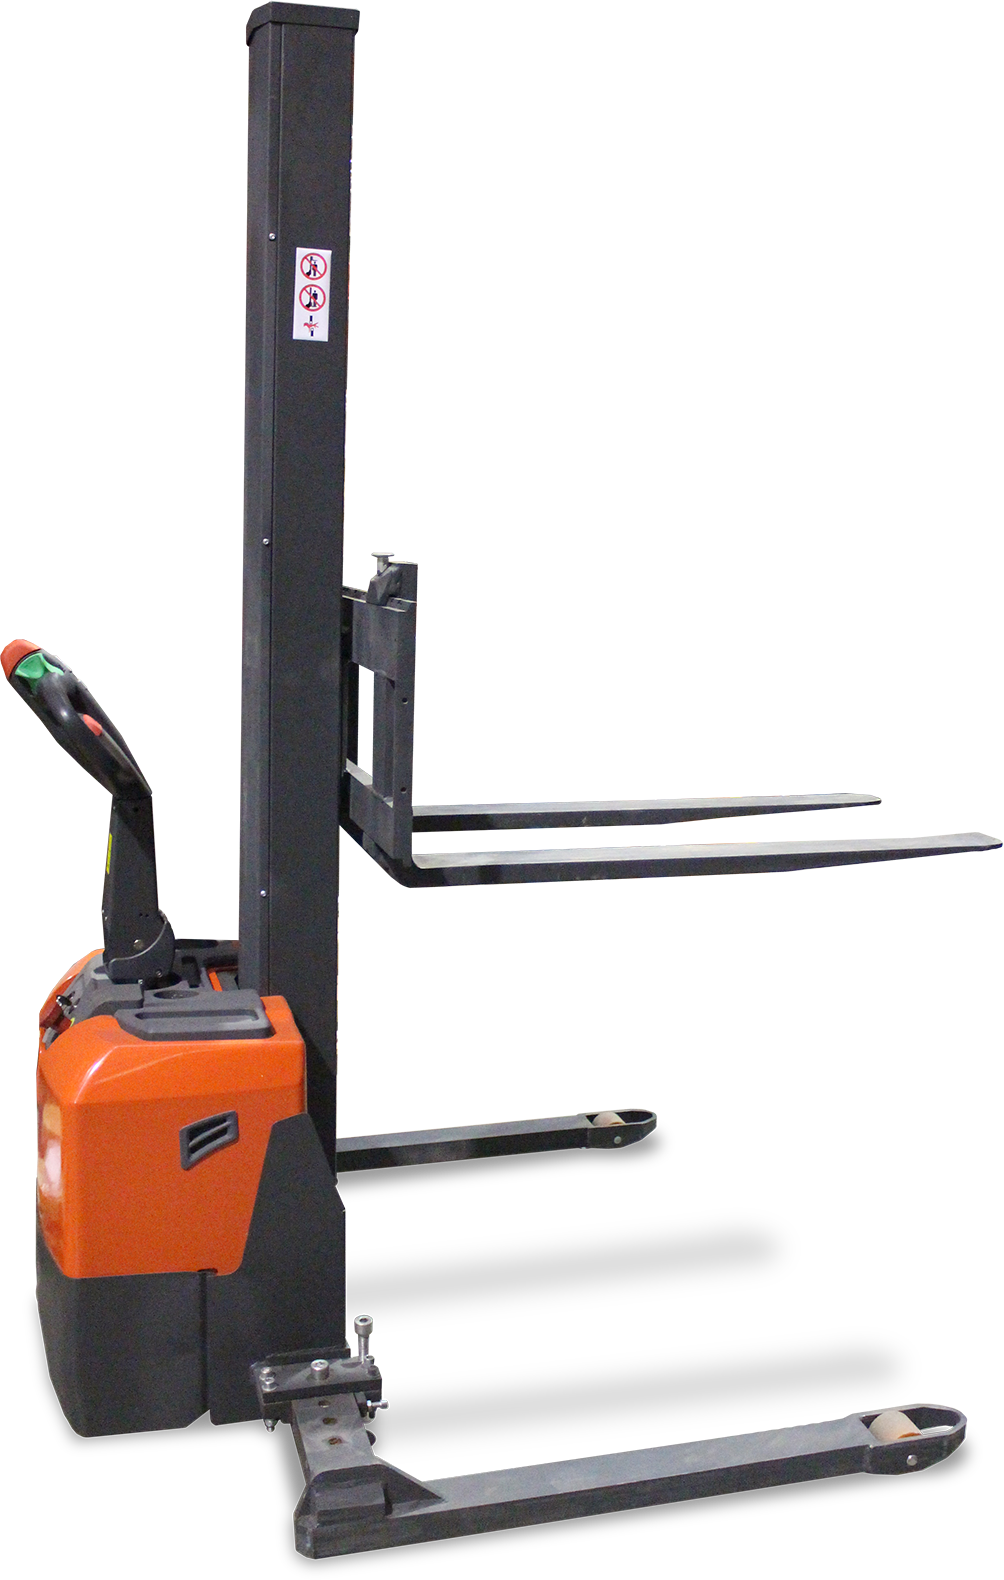 Buy Electric Straddle Stacker (Mono-Mast) in Pallet Stackers from Astrolift NZ